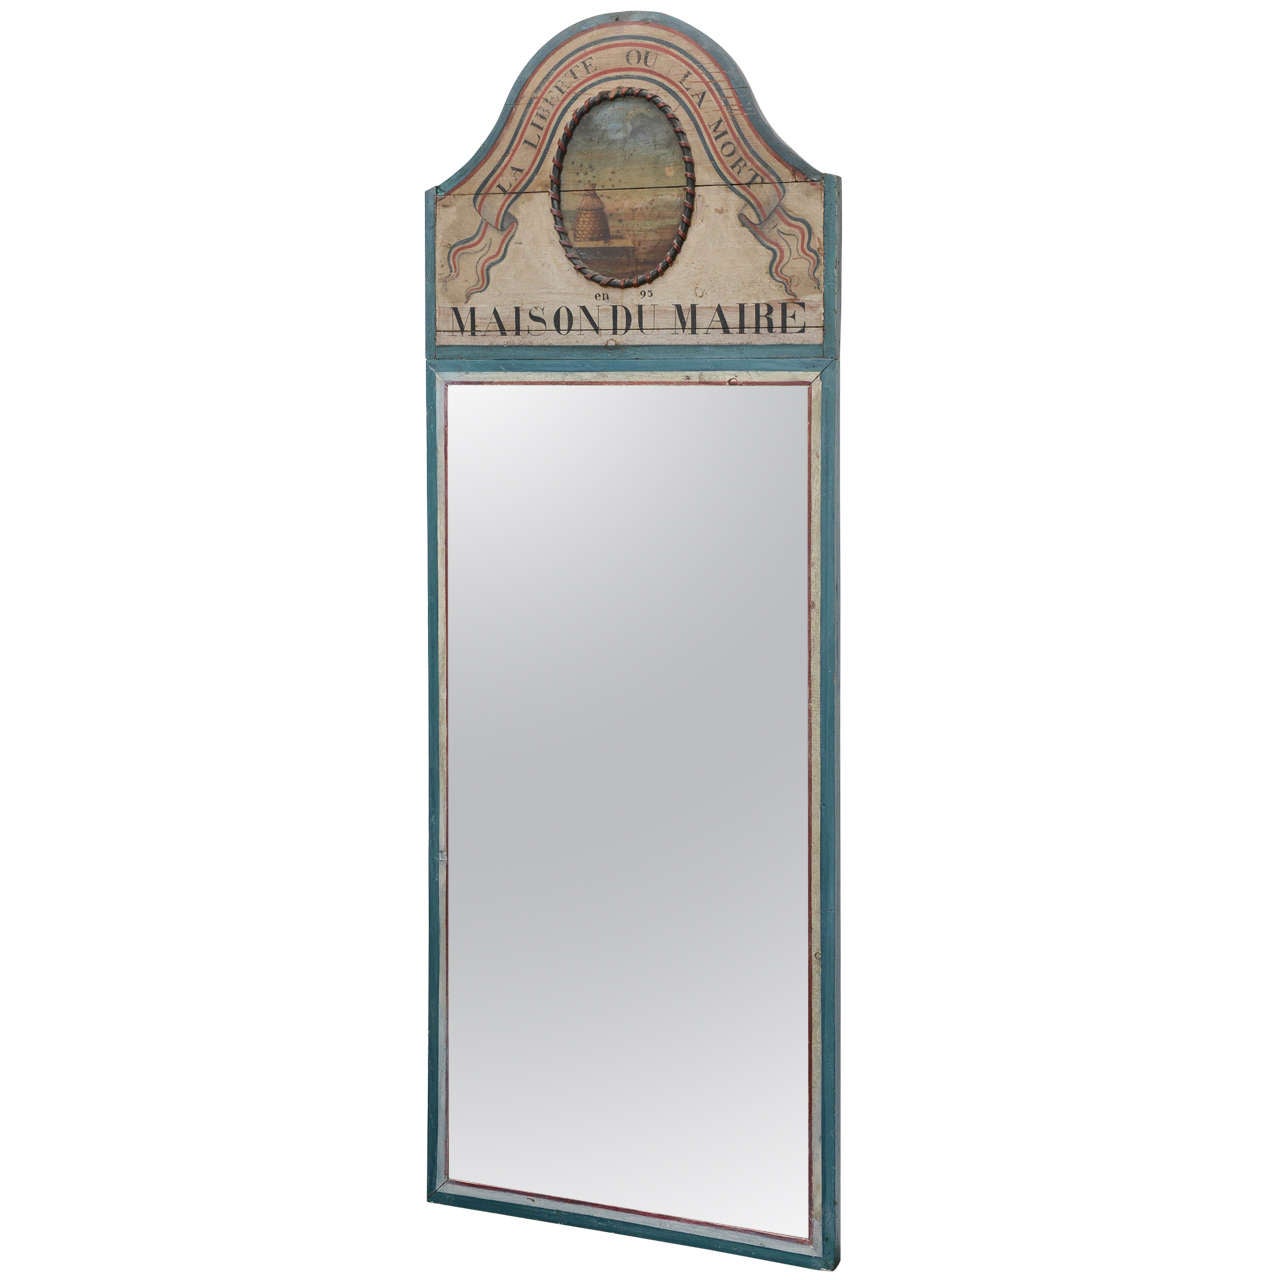 Trumeau Mirror with Hand-Painted Beehives